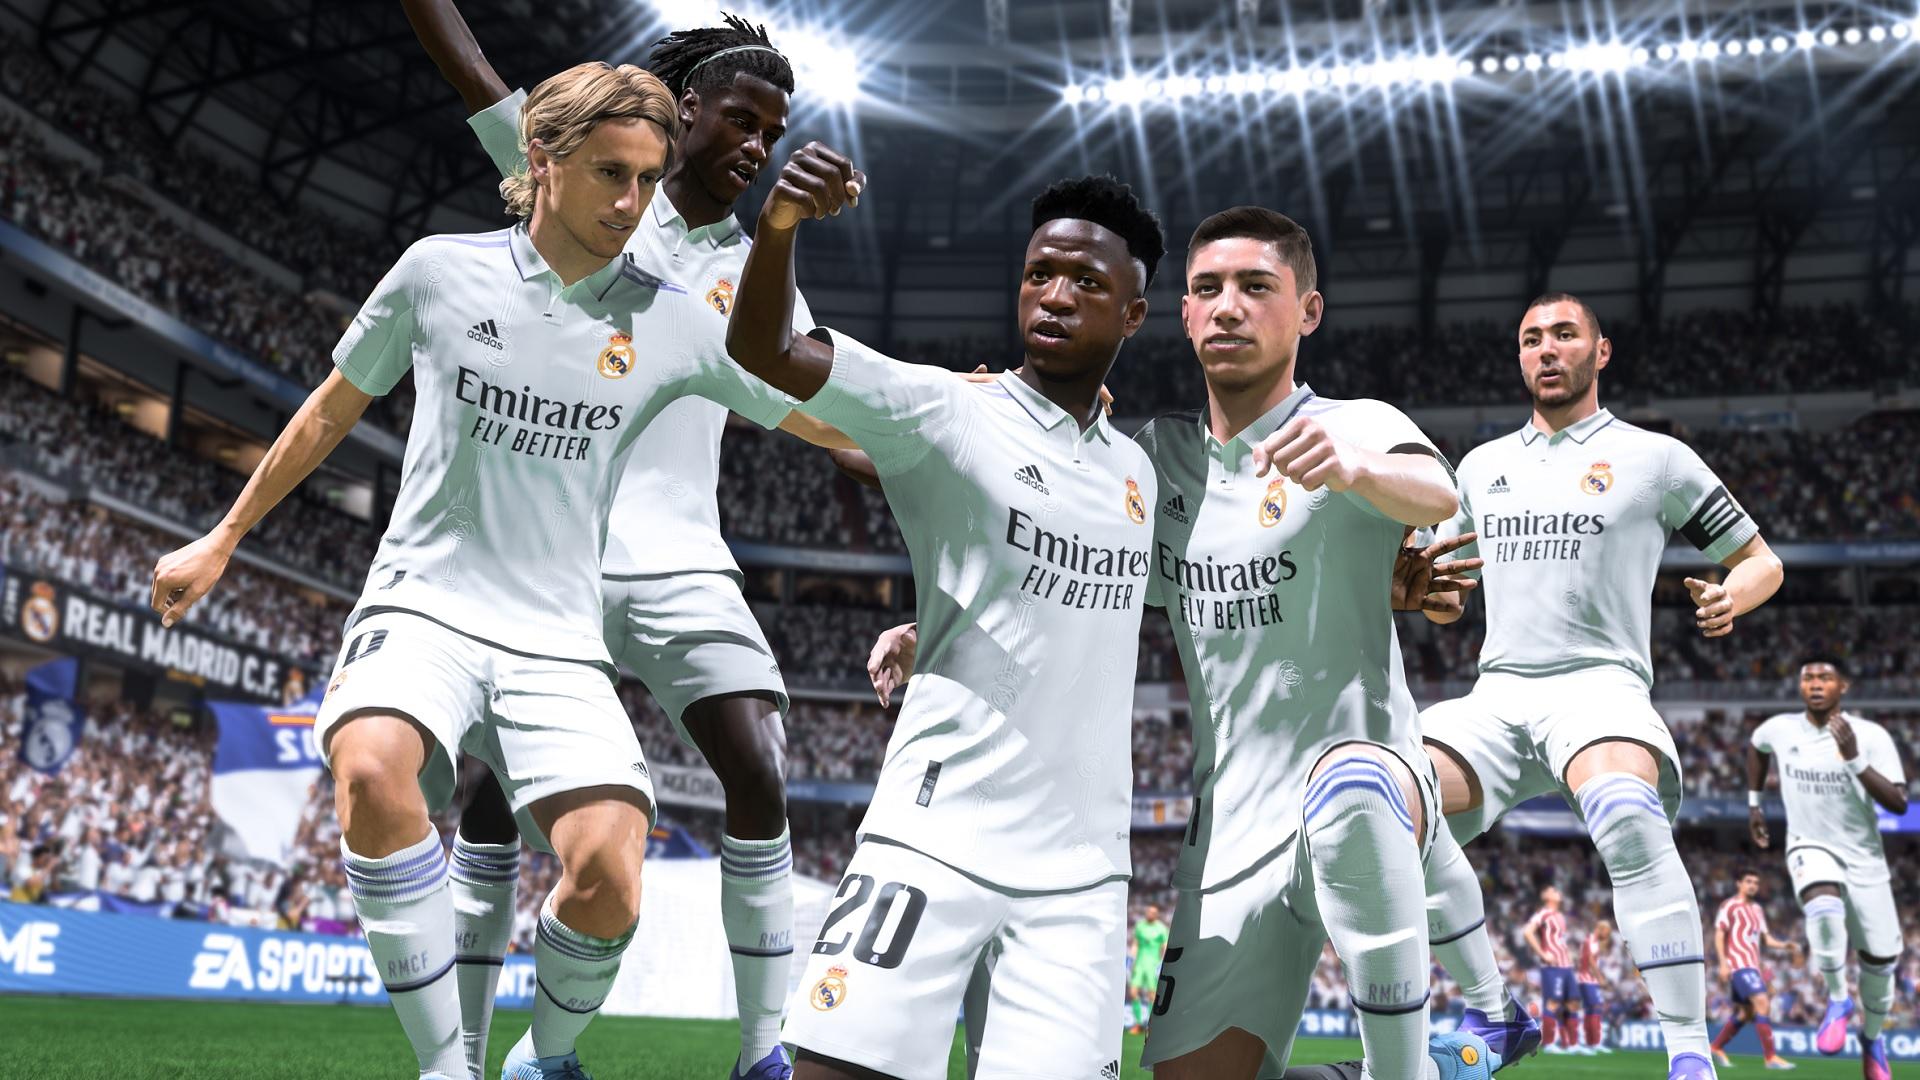 The 20 Greatest FIFA Video Games, Ranked